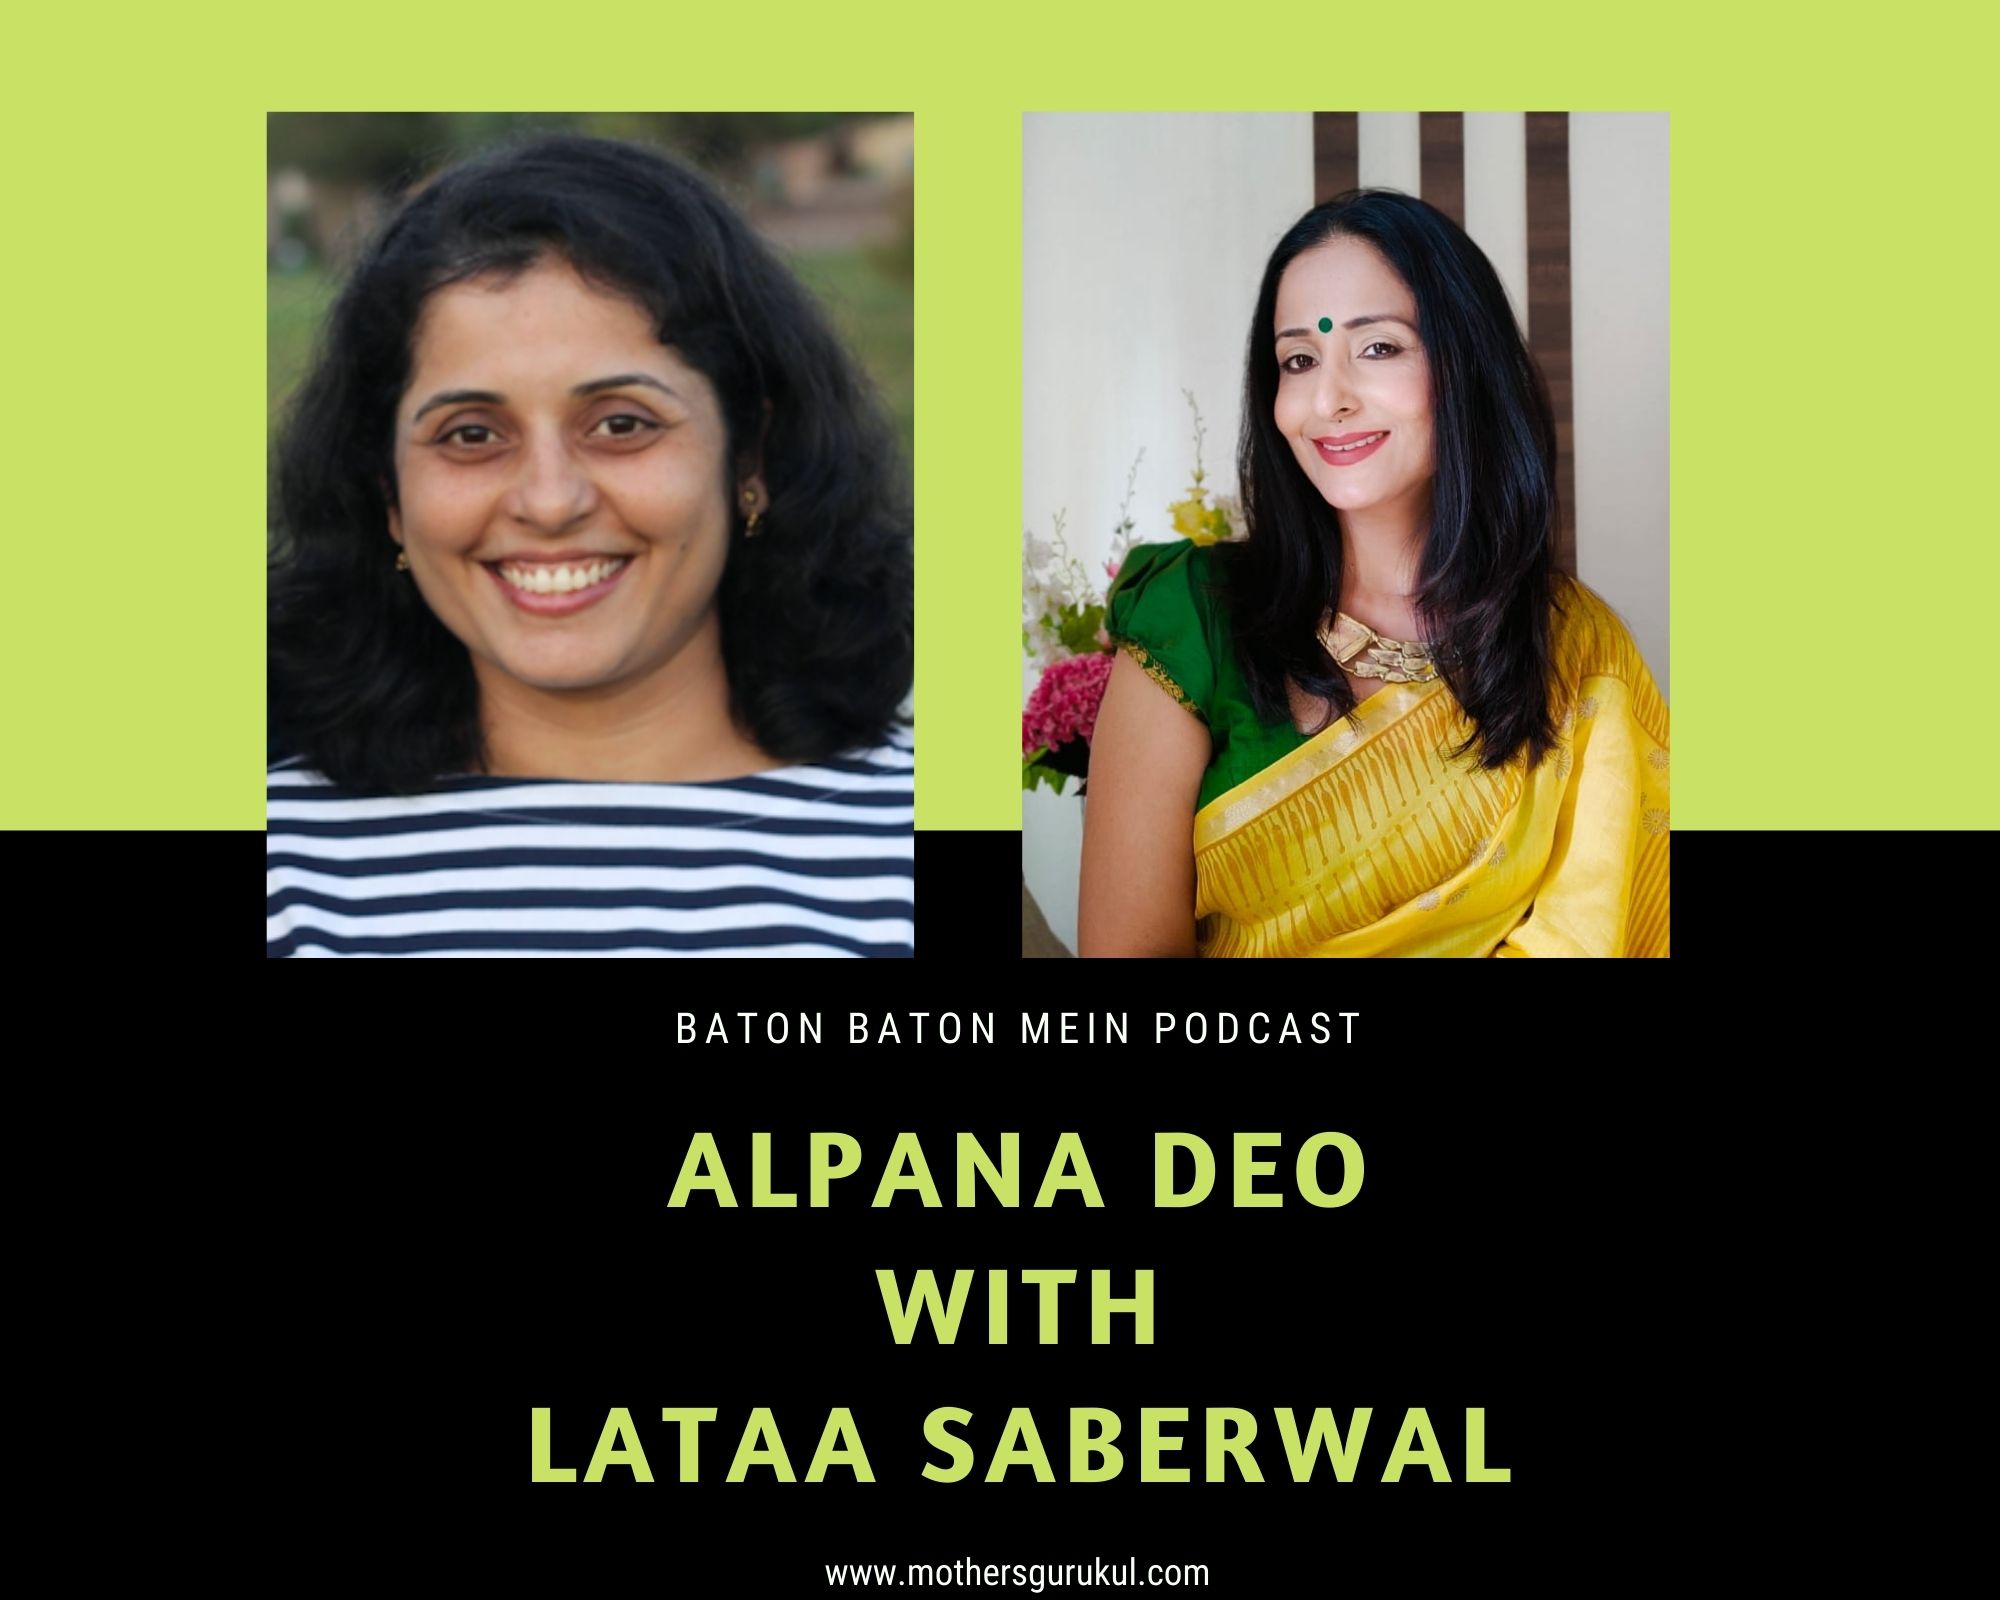 Lataa Saberwal talks about inner beauty, fitness, and much more